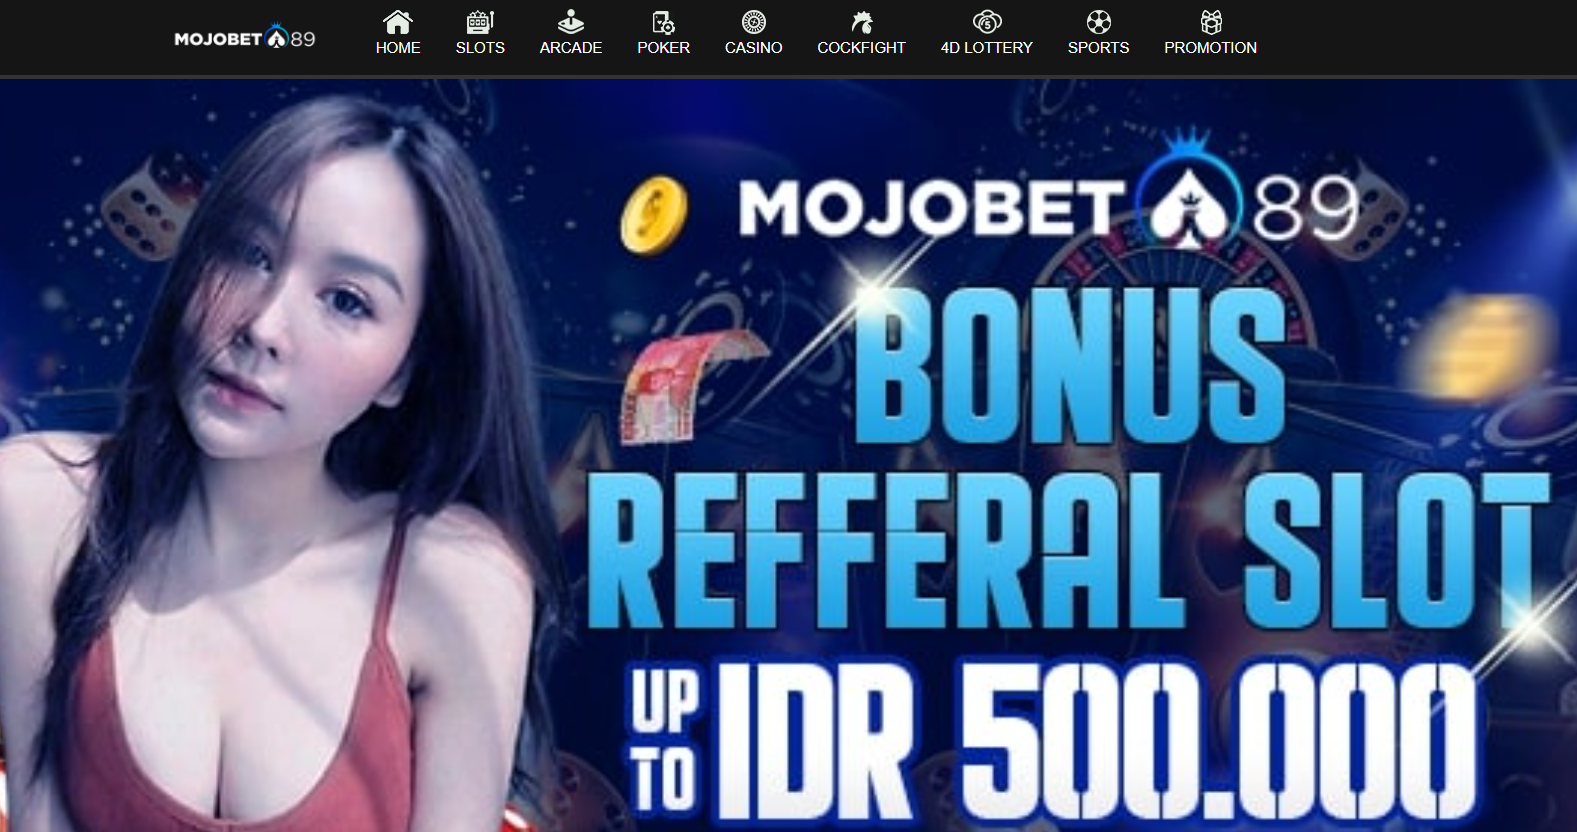 an ad for an indonesian gambling site